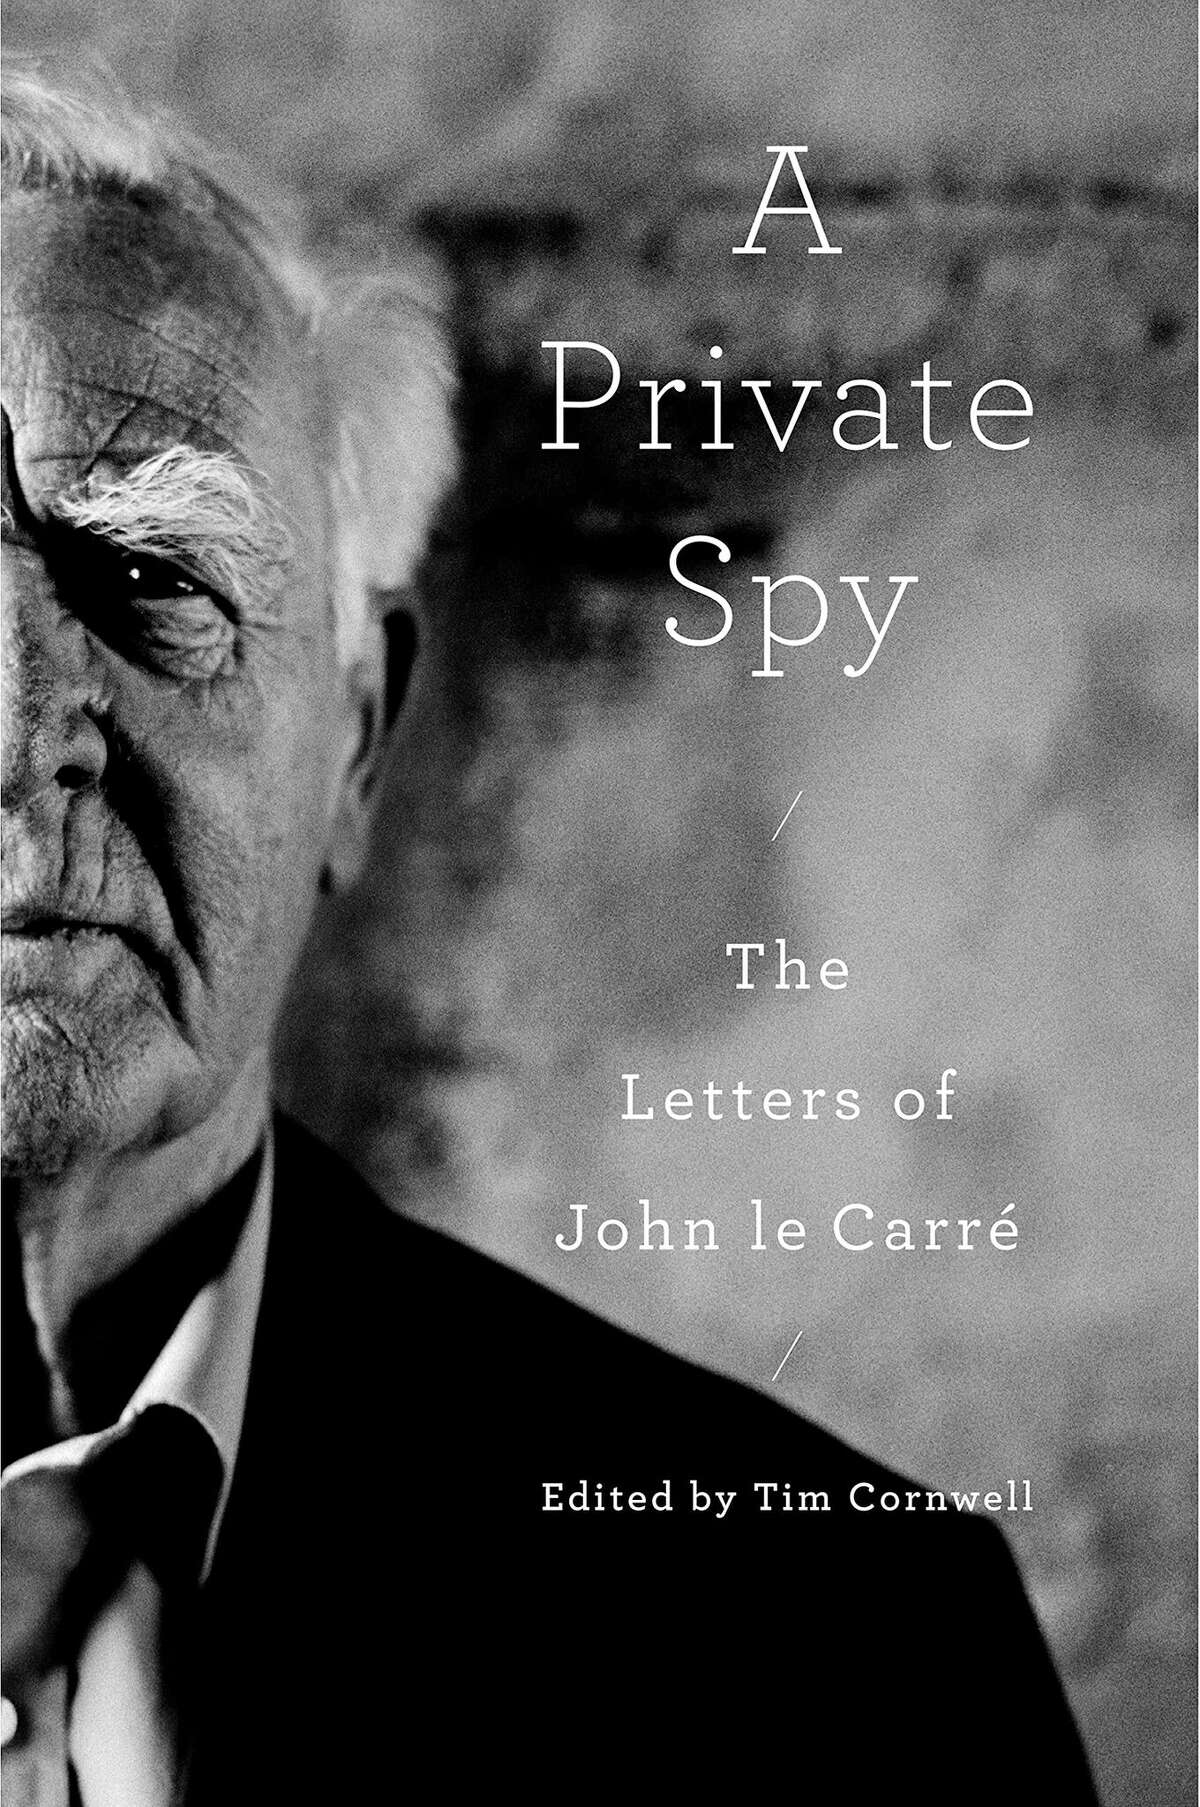 "A Private Spy: The Letters of John le Carre"